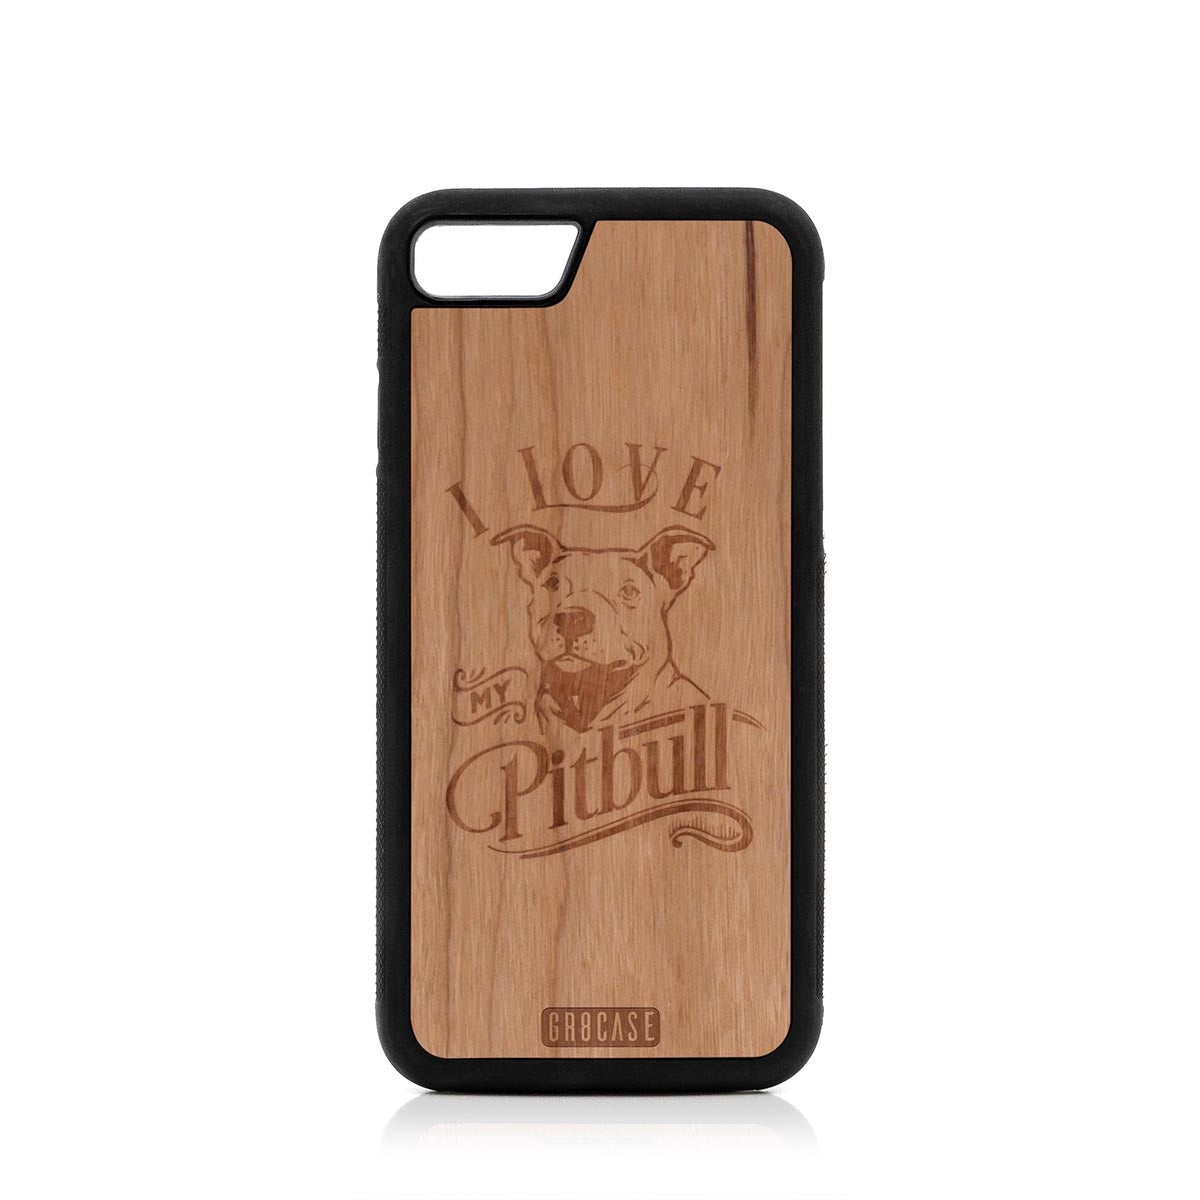 I Love My Pitbull Design Wood Case For iPhone 7/8 by GR8CASE